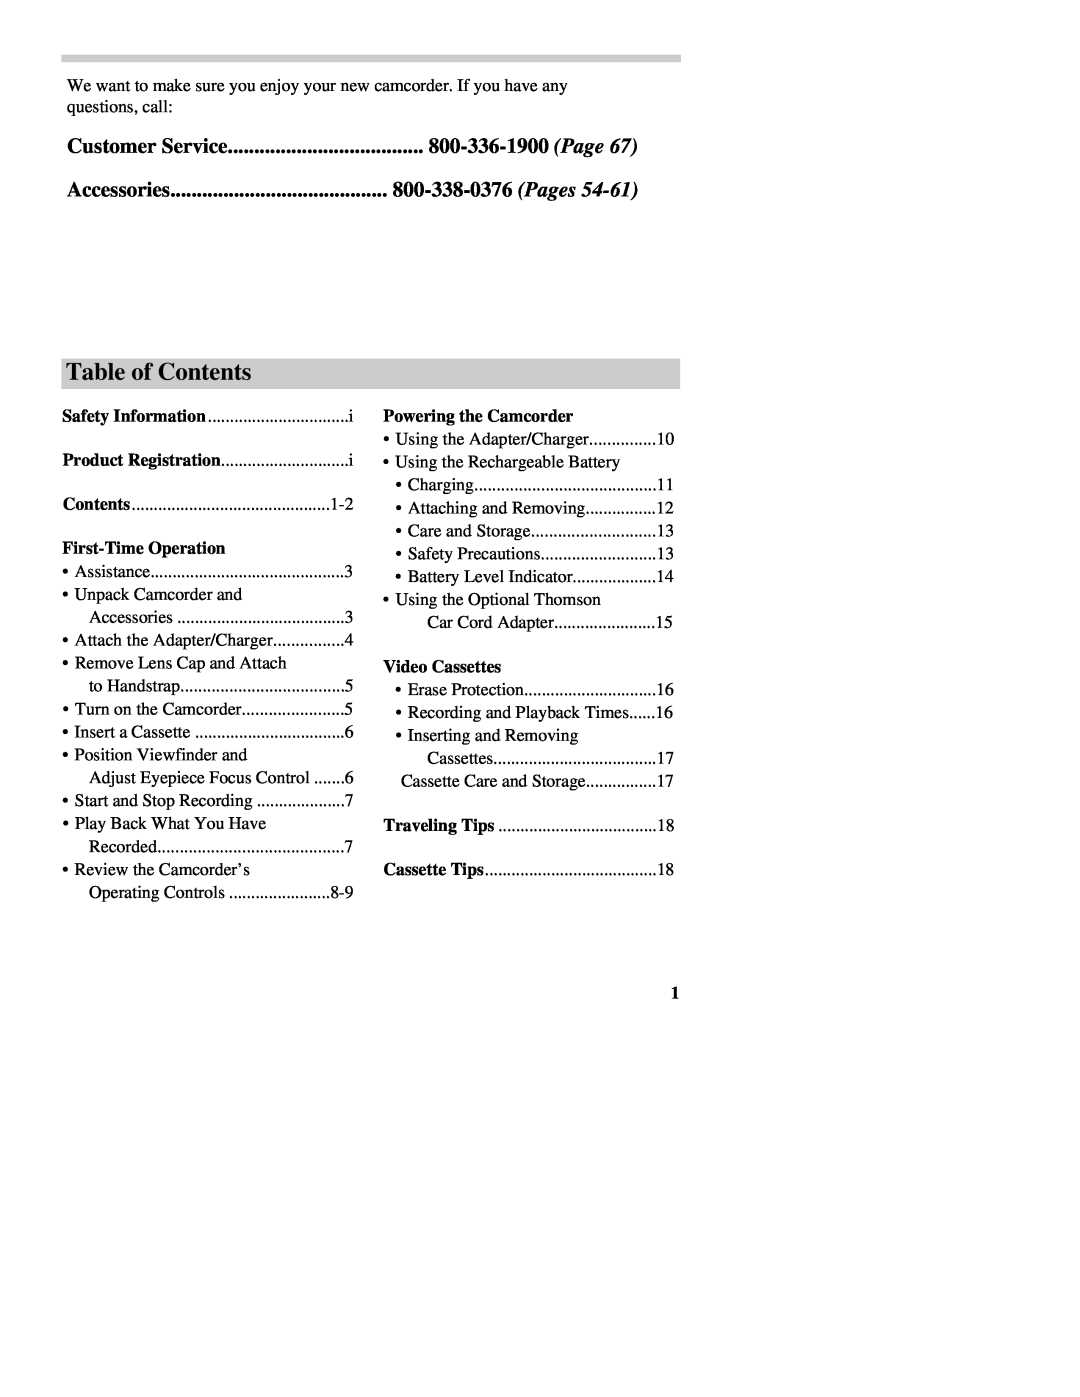 RCA CC437 manual Table of Contents, Customer Service, First-Time Operation, Powering the Camcorder, Video Cassettes 